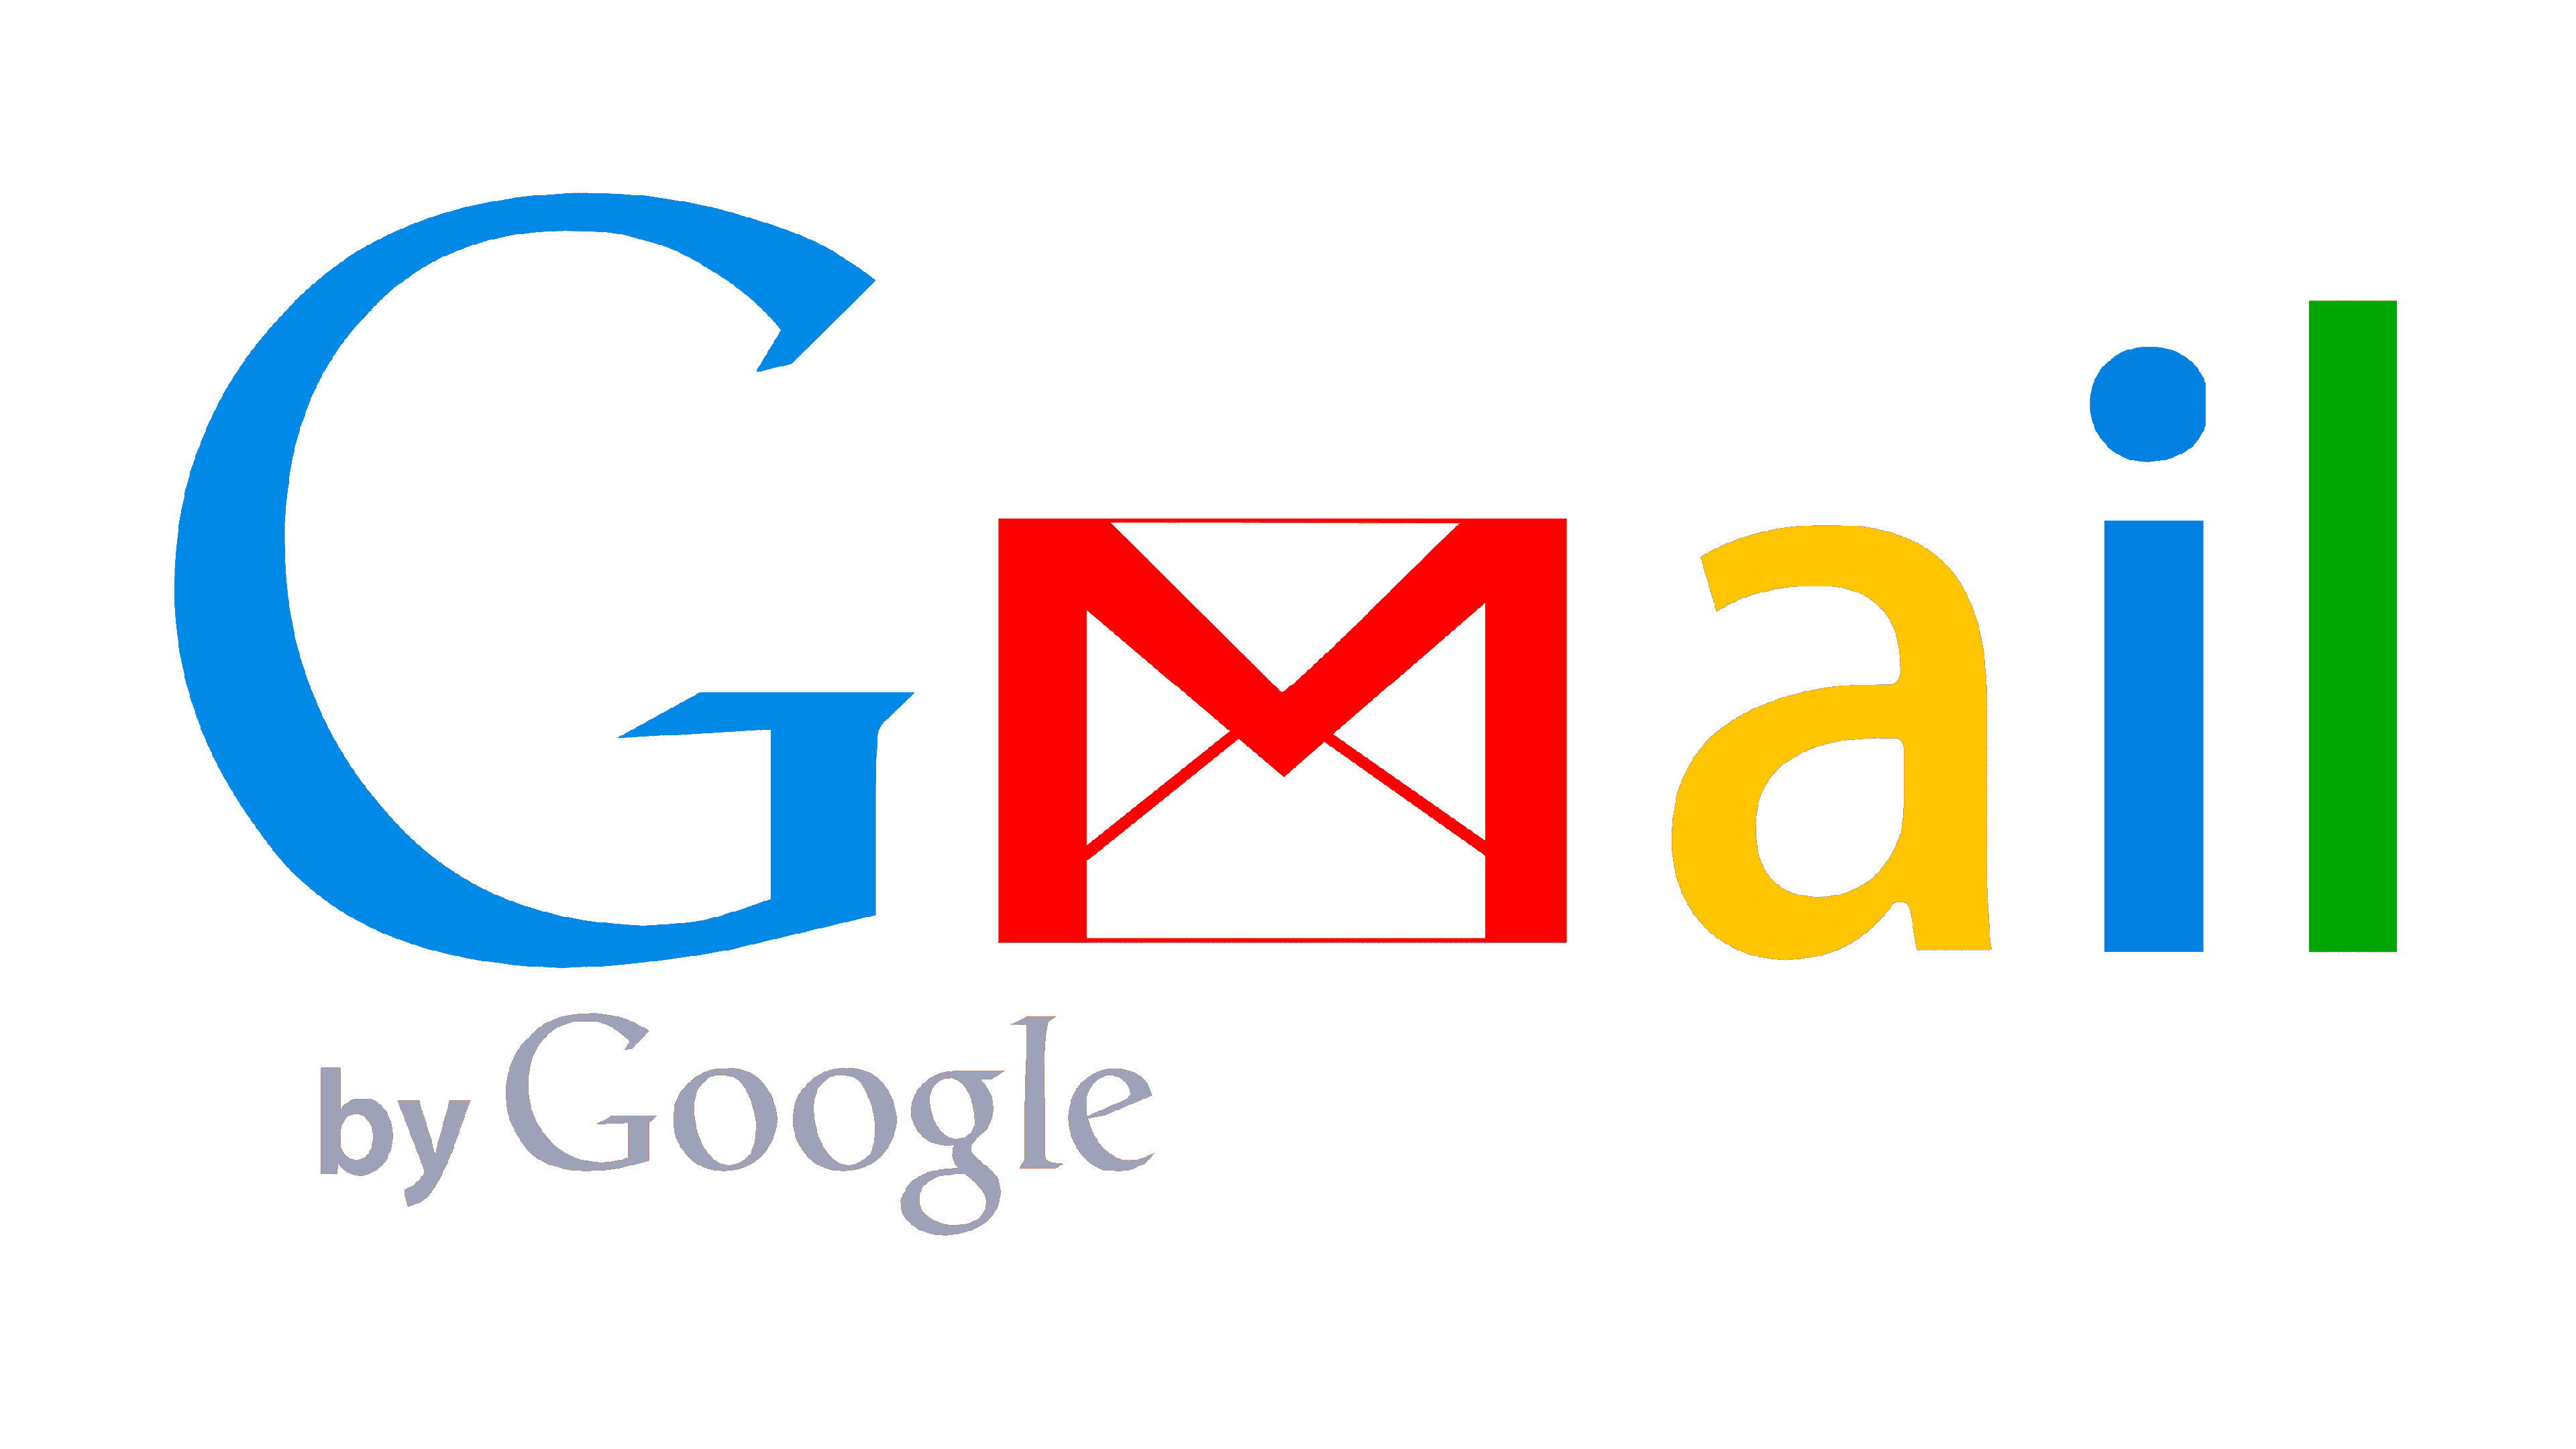 Gmail Logo And Symbol Meaning History Png Brand